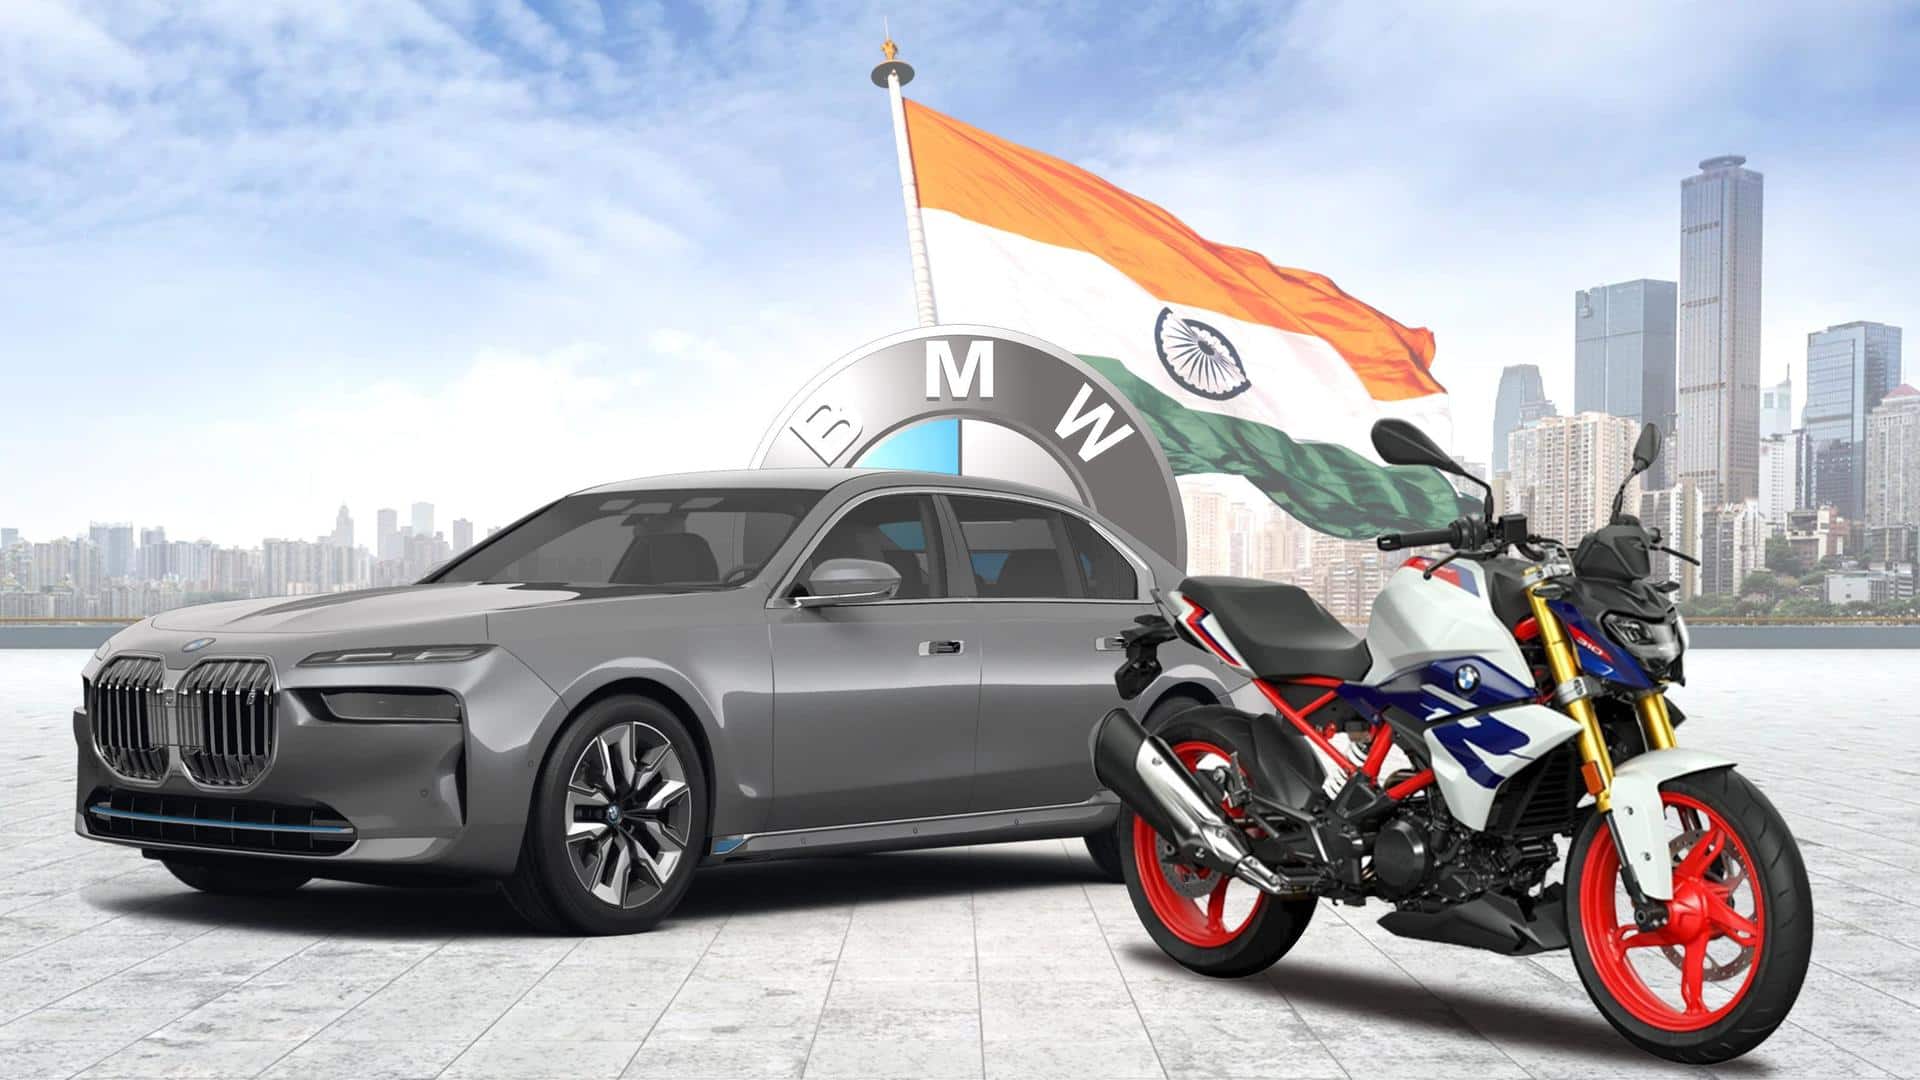 What BMW has in store for Indian buyers in 2023